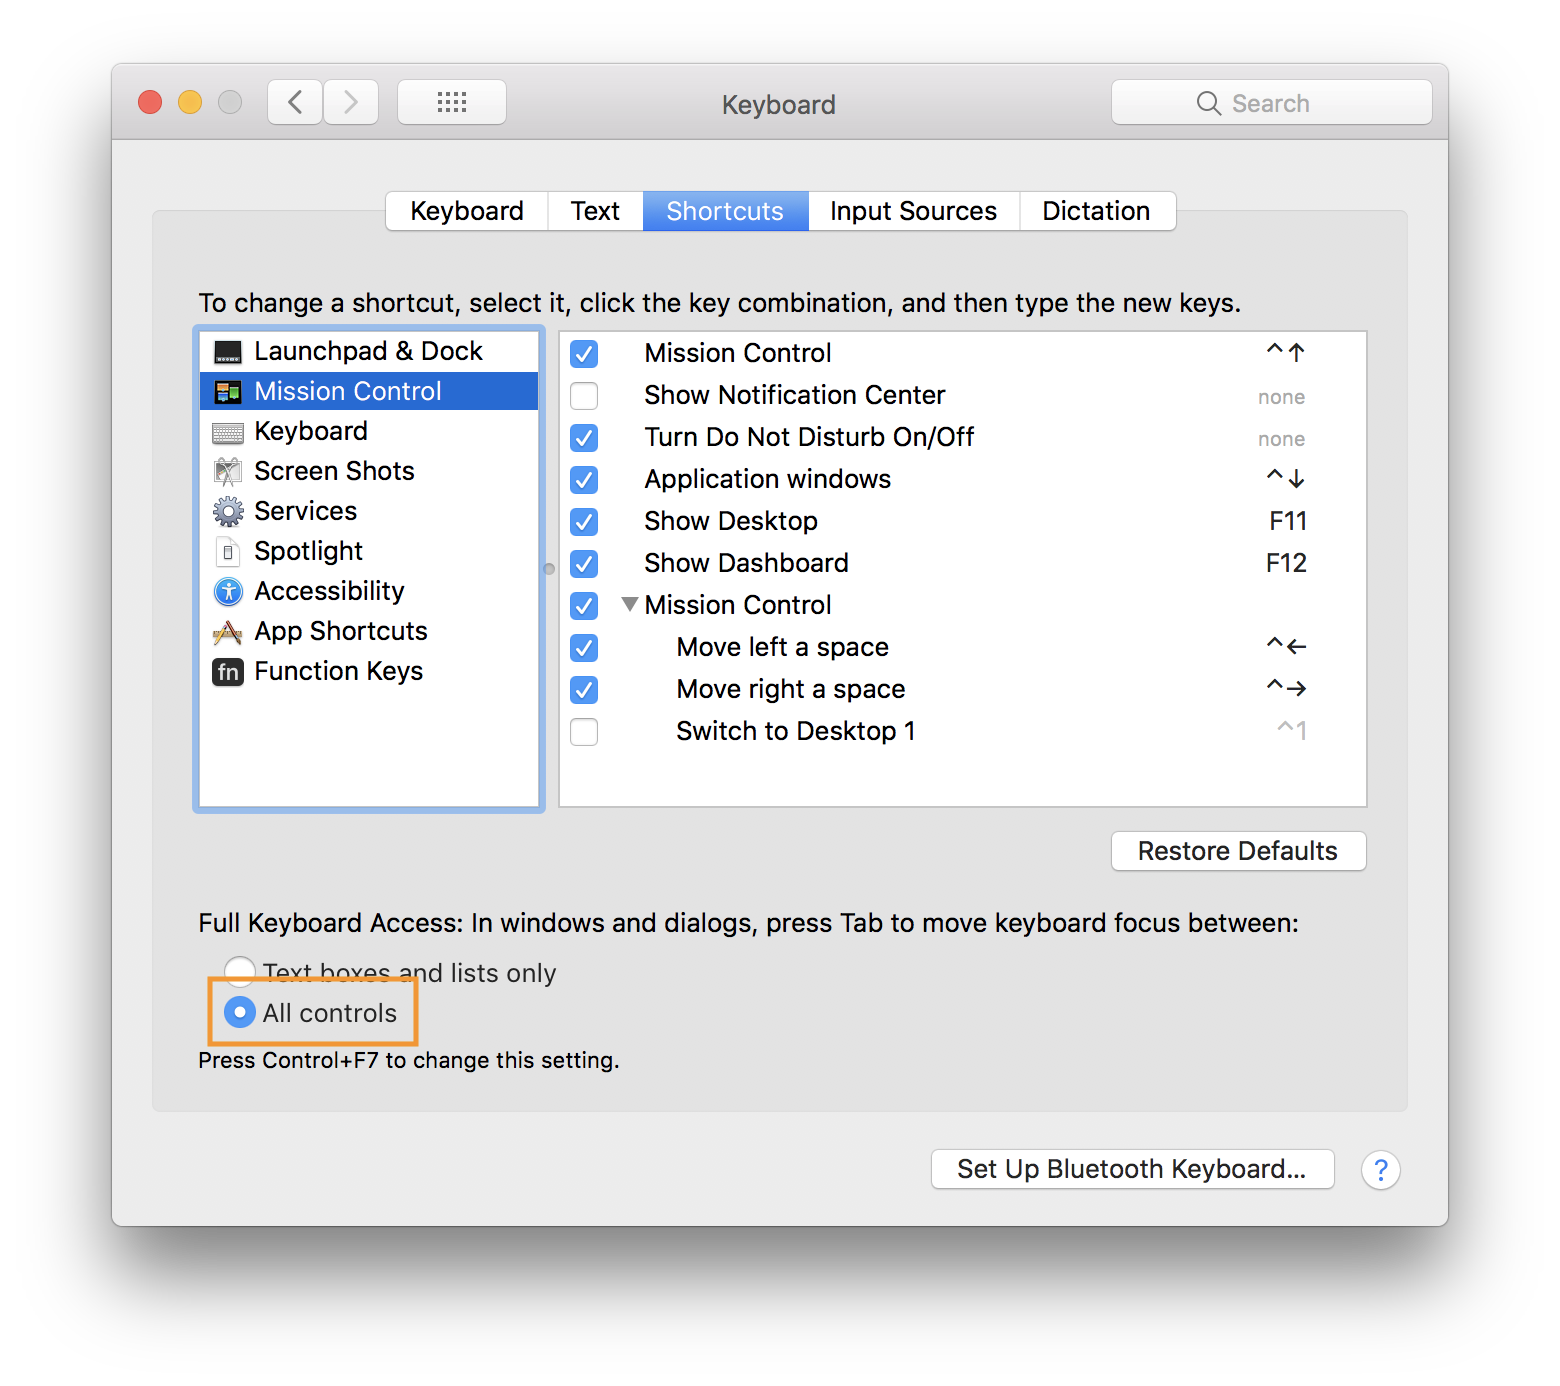 The macOS Settings window pre-Catalina. The screenshot is highlighting the selection of the 'All controls' radio button.